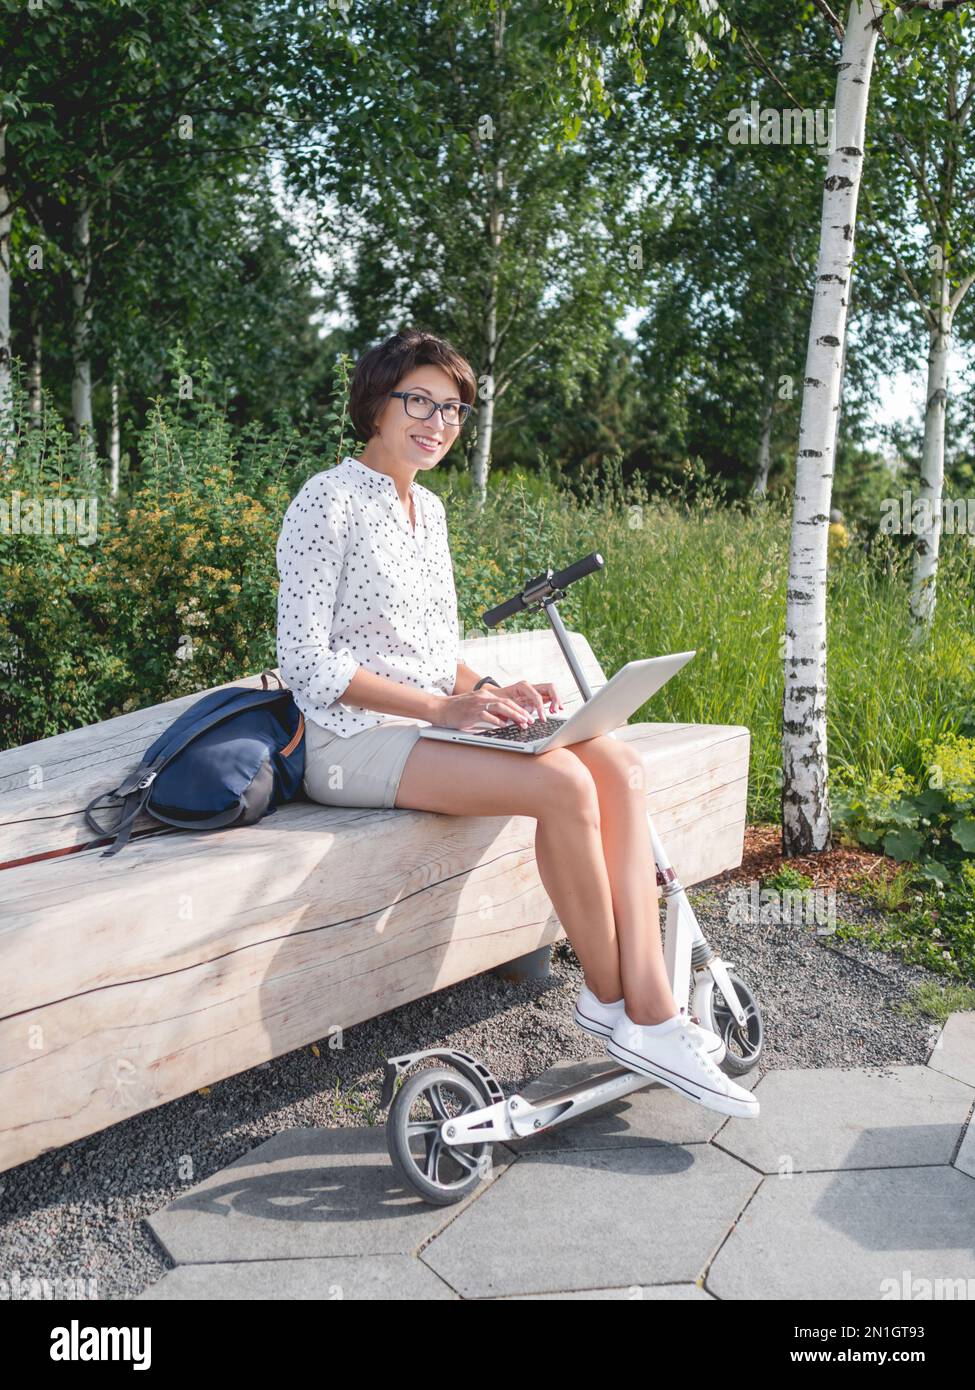 Smiling woman works with laptop on wooden bench in urban park. Summer vibes. Modern workplace for freelancers. Student educates online from outdoors. Stock Photo